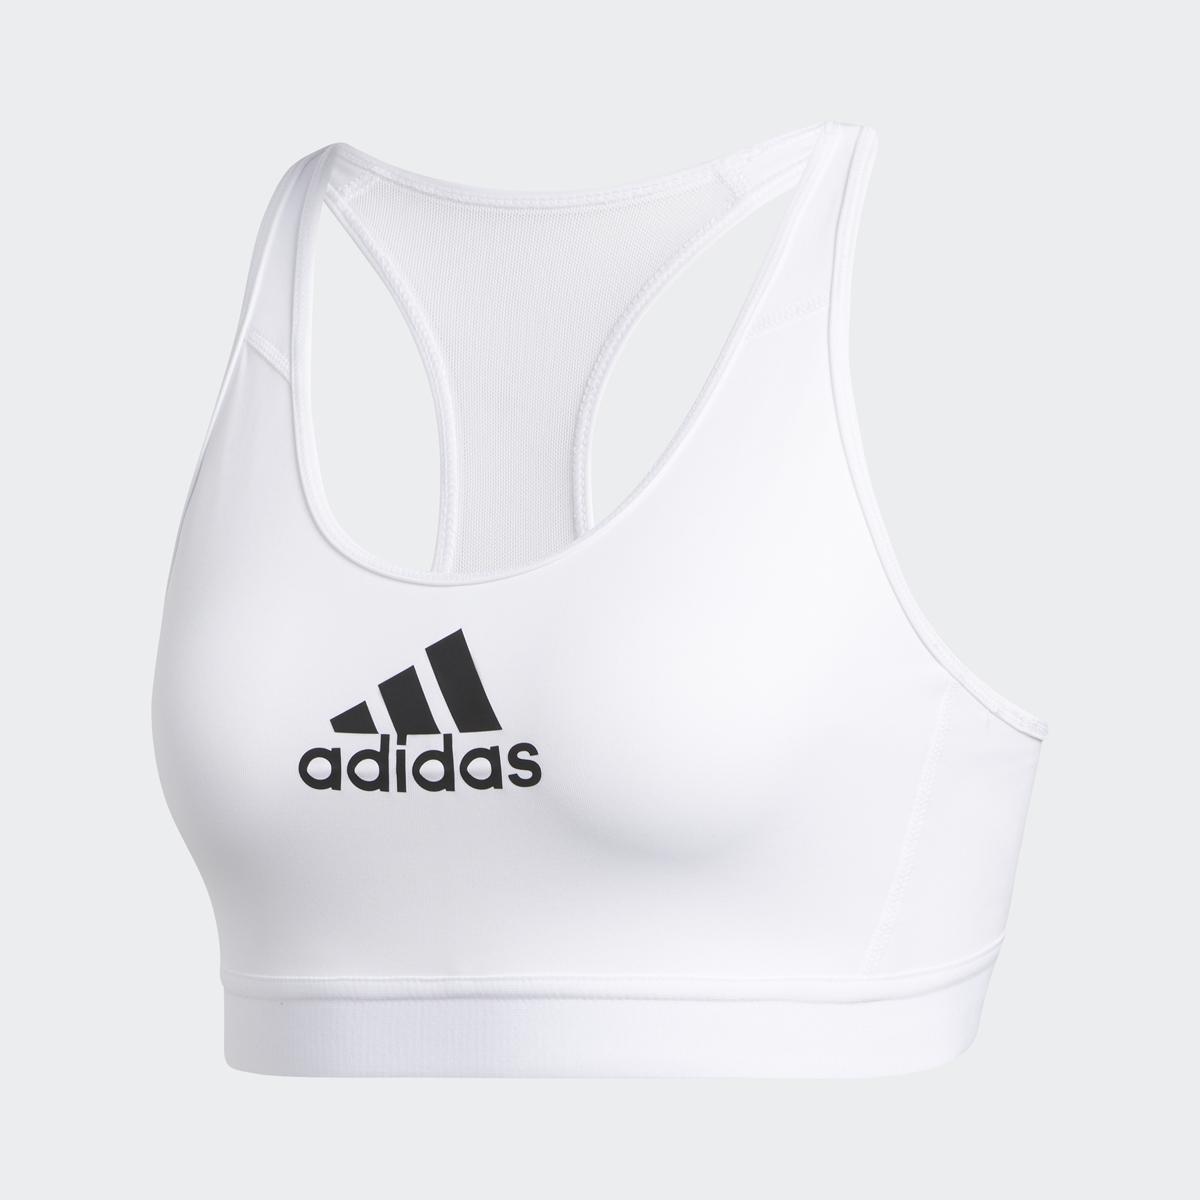 adidas Dont Rest Racerback Sports Bras for $6.39 Shipped